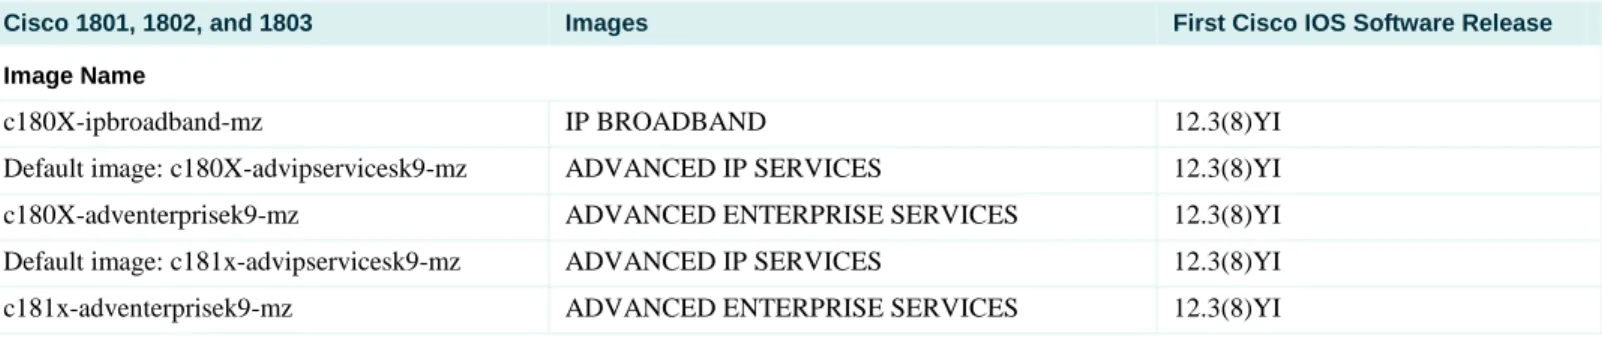 Table 5.  Cisco IOS Software Images for the Cisco 1801, 1802, 1803, 1811 and 1812 Routers 